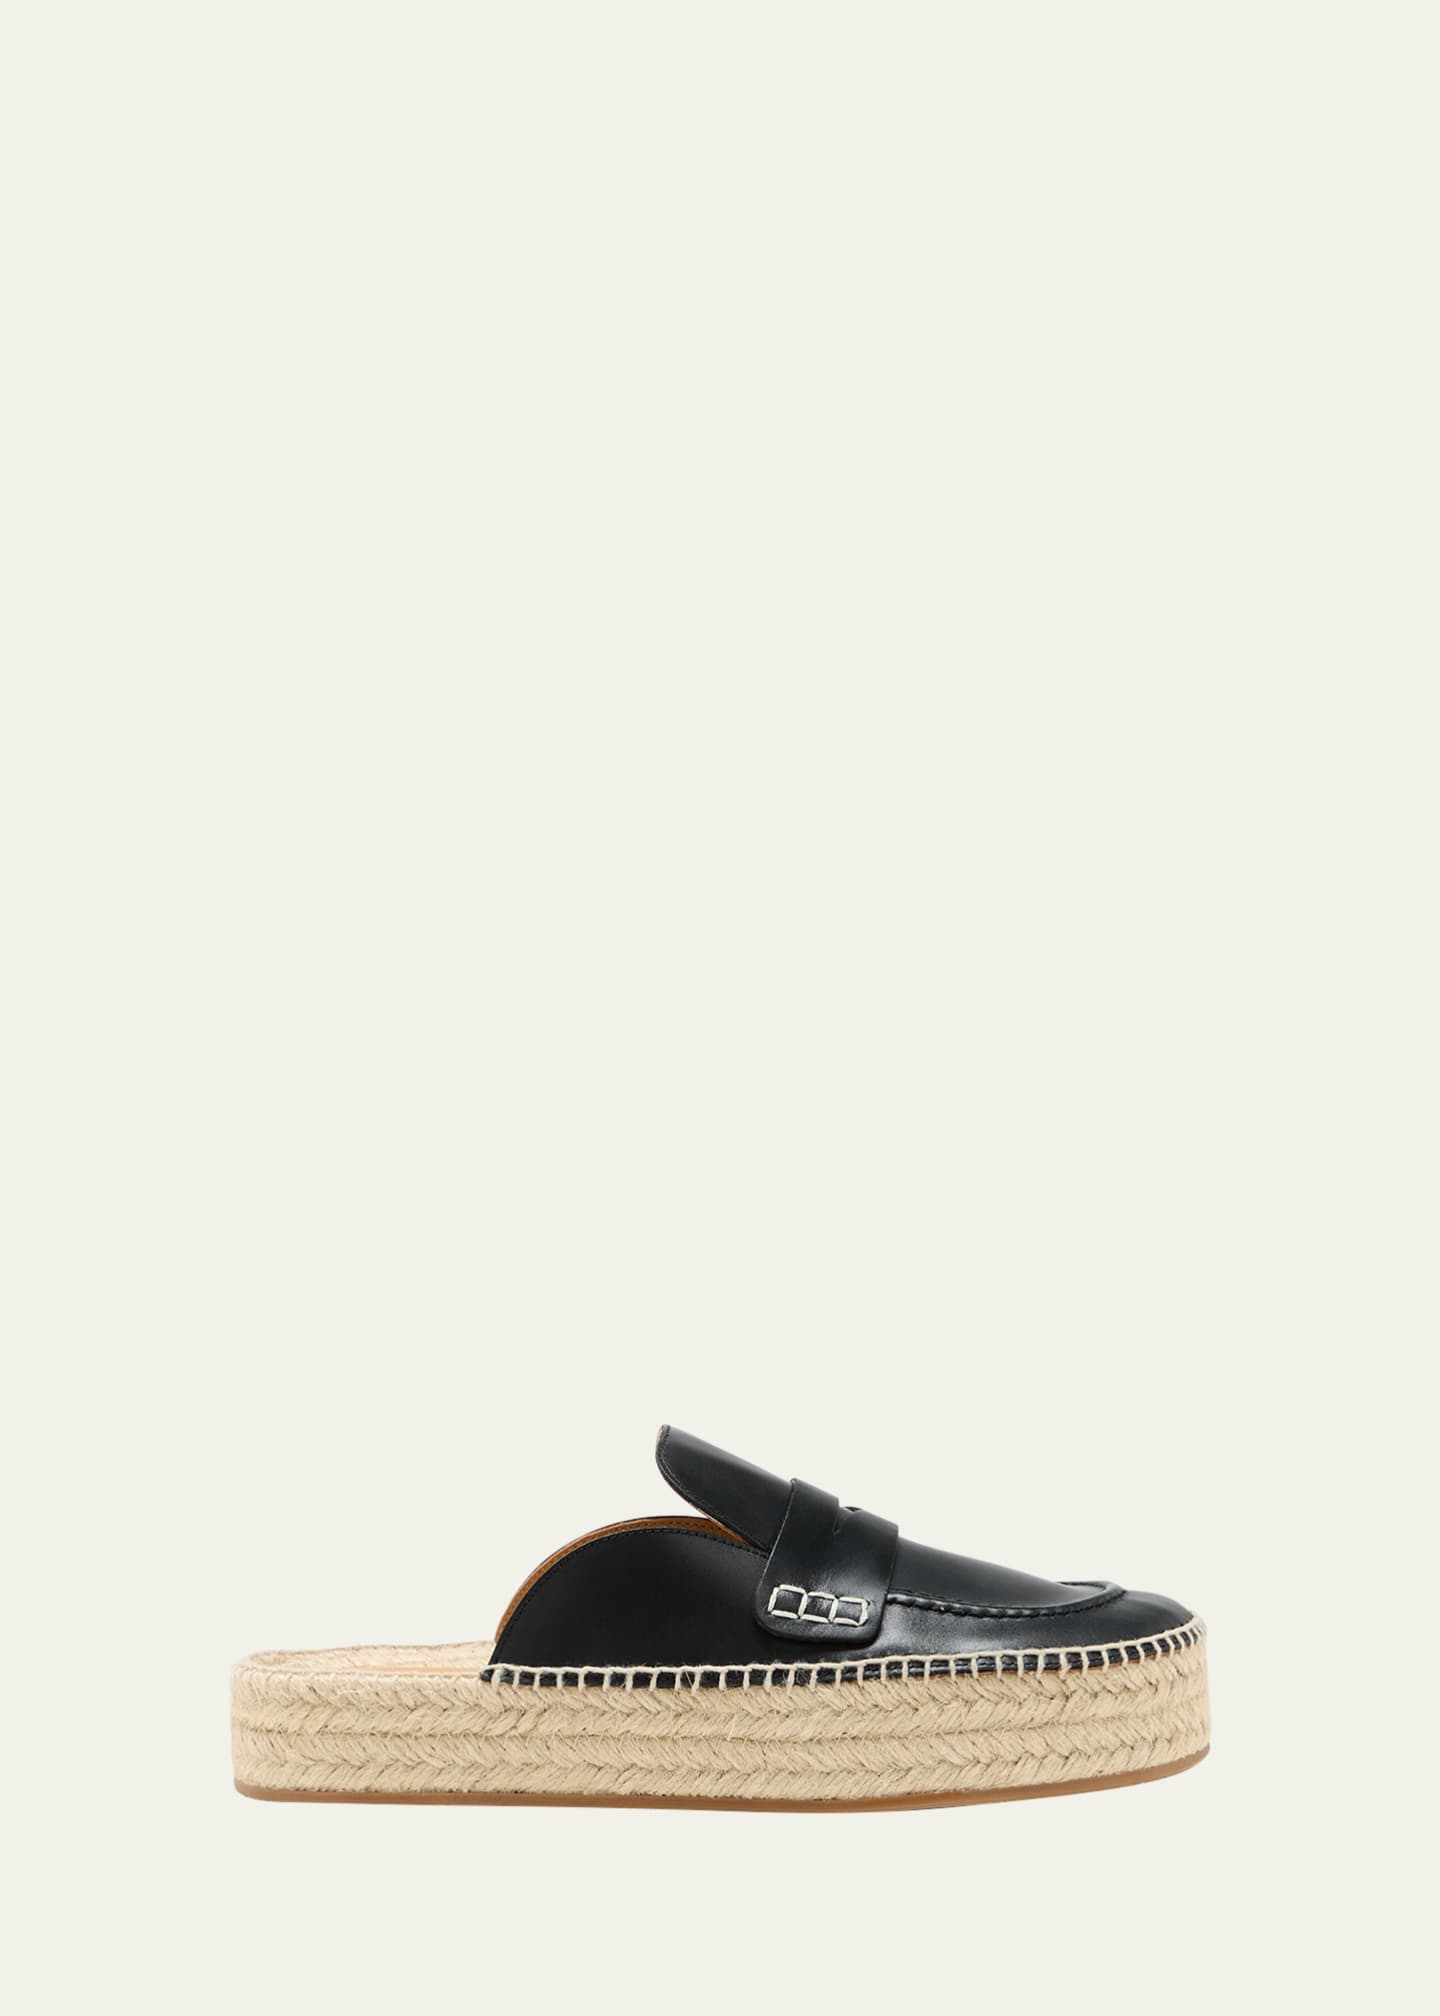 JW Anderson check loafer mules - White